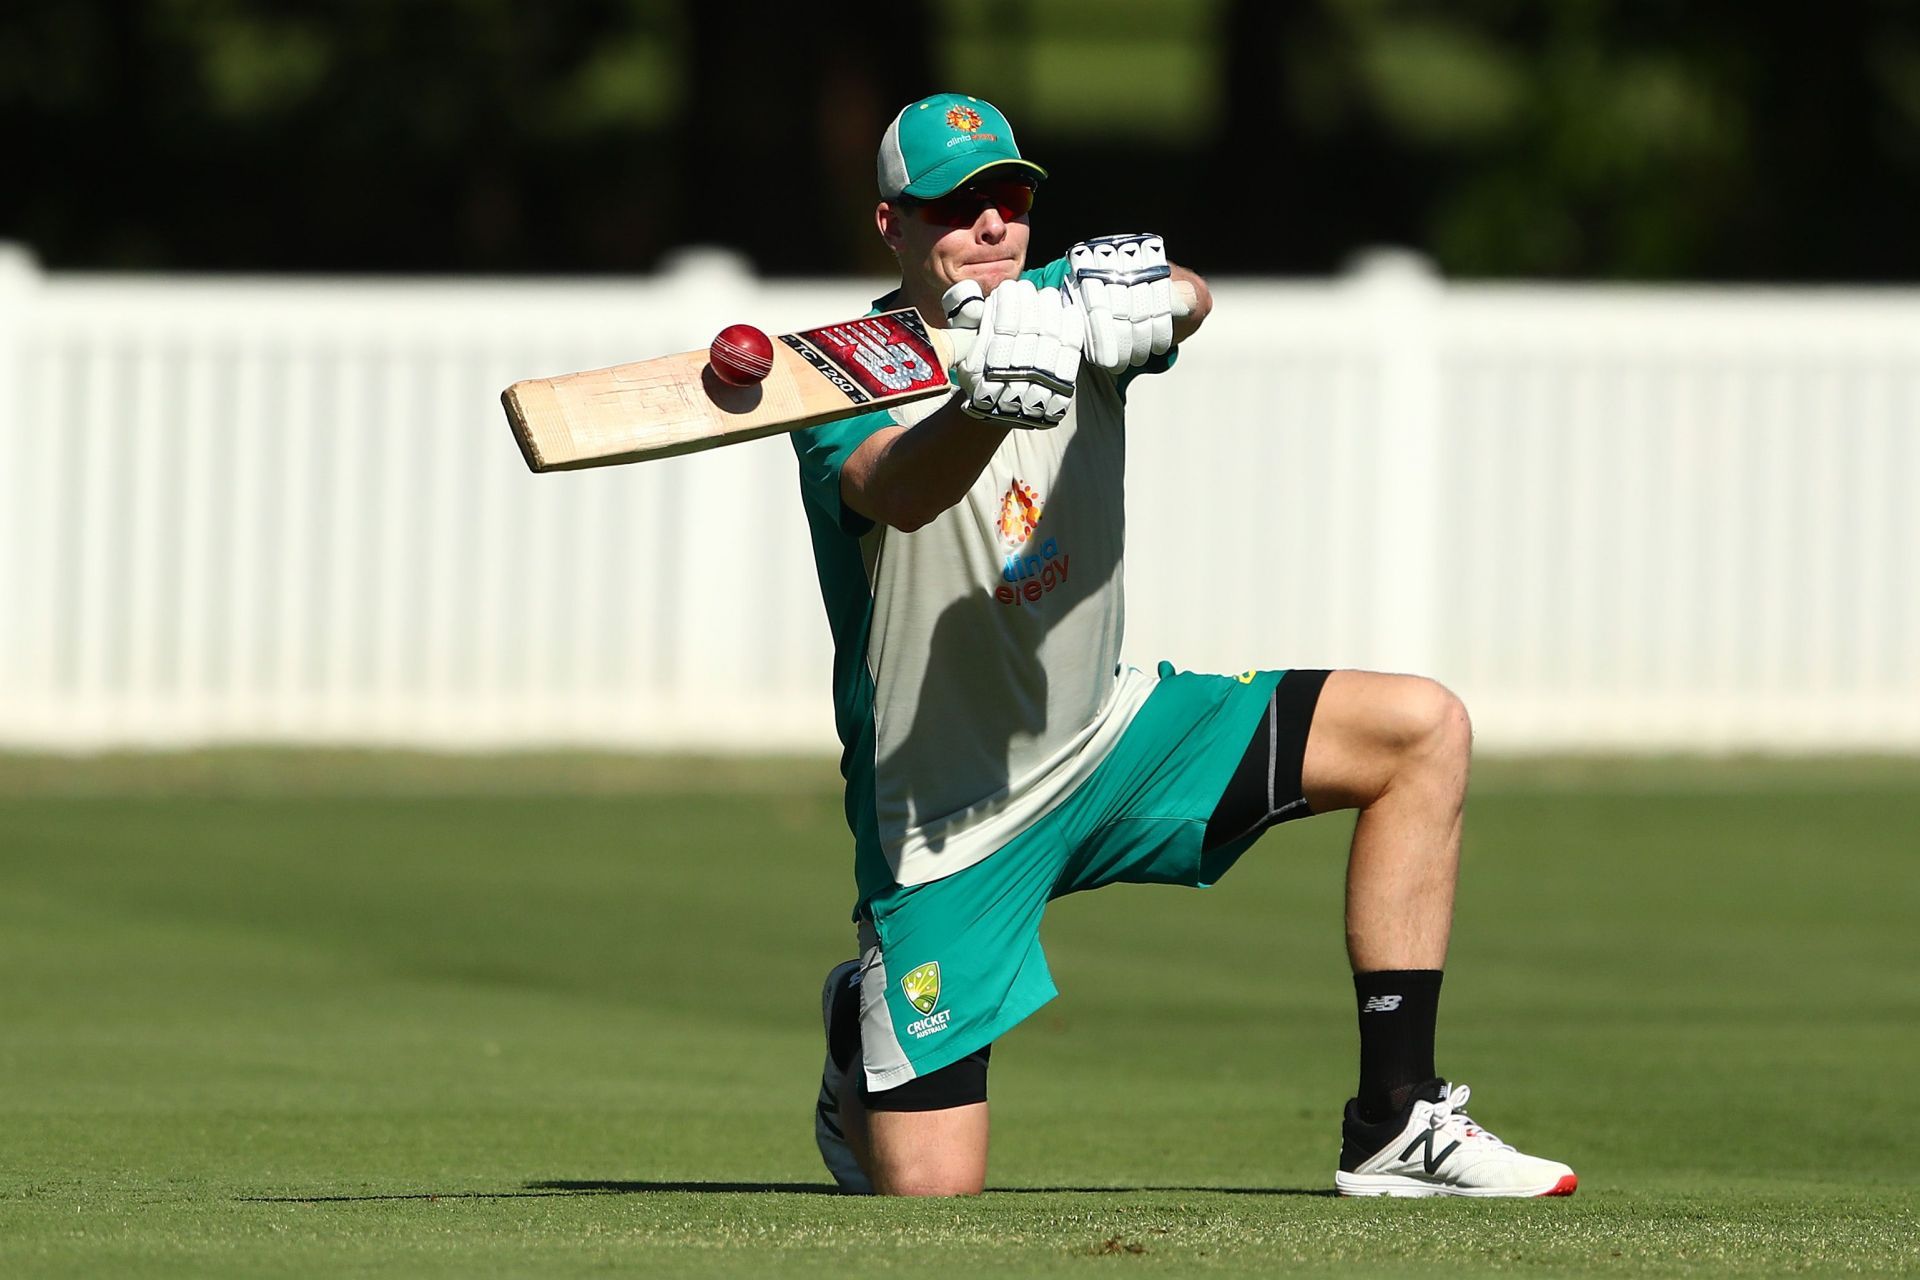 Steve Smith during a practice session. Pic: Getty Images